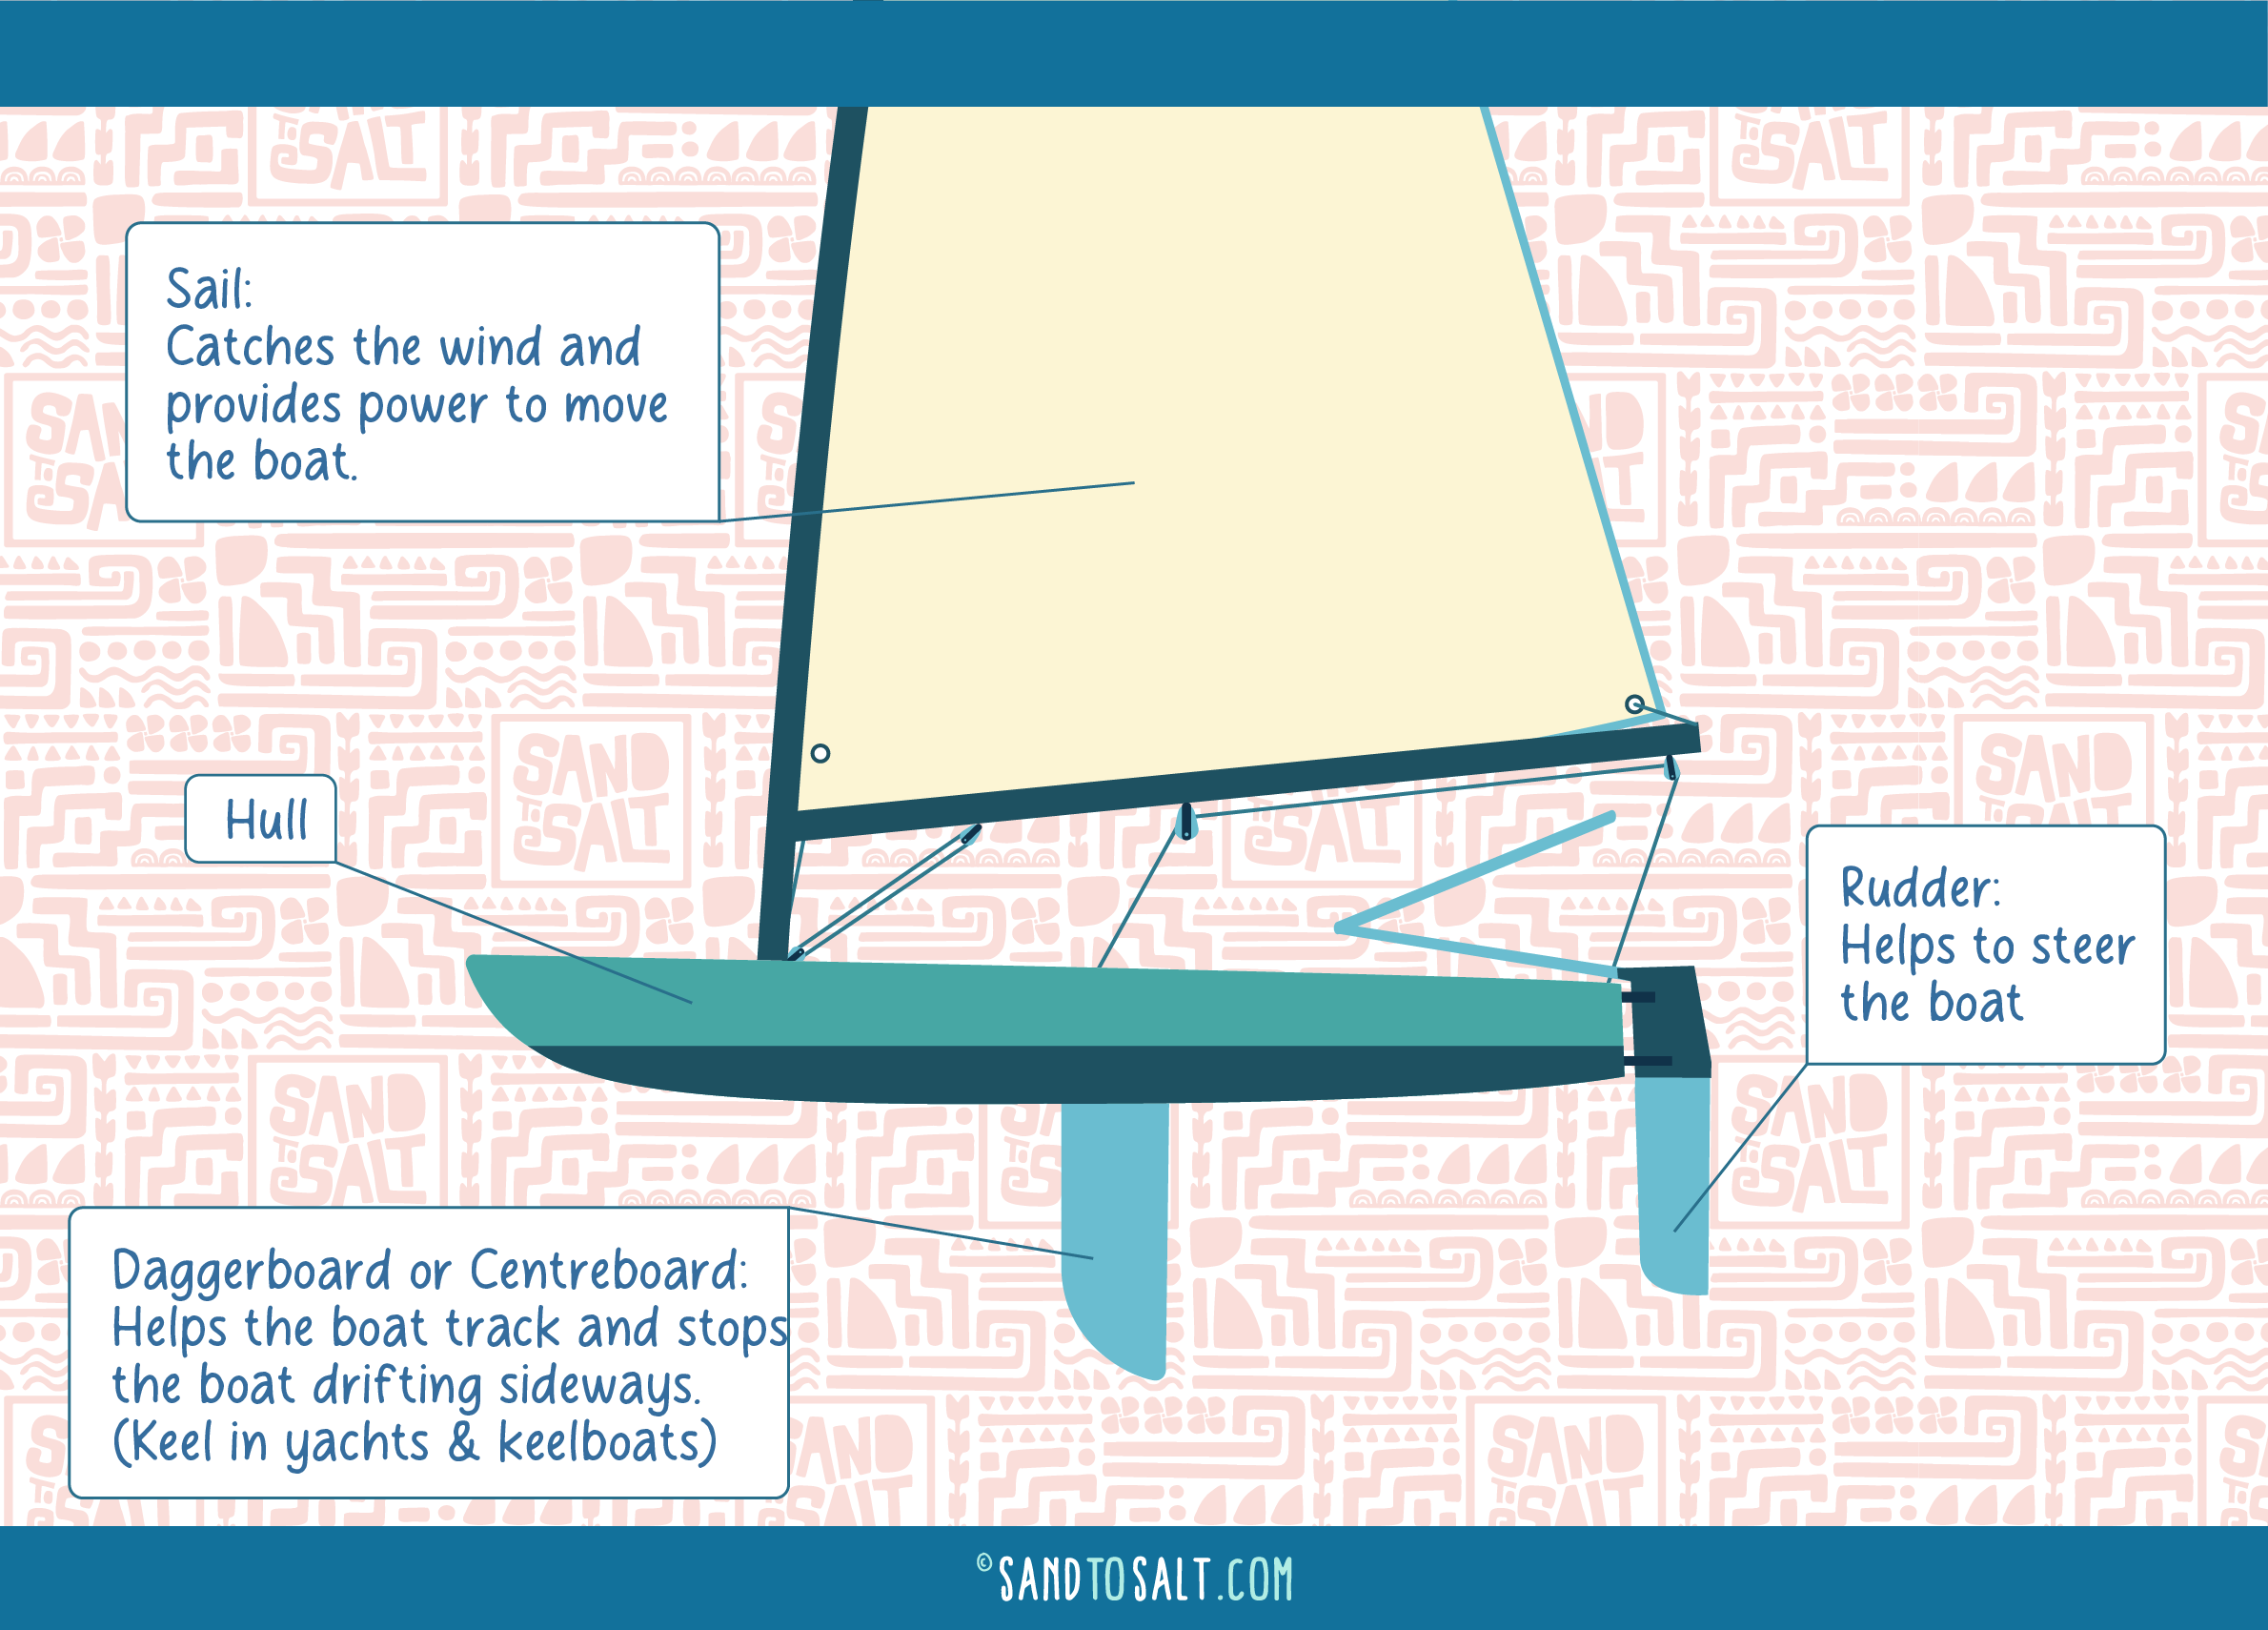 How a sailing boat works: Diagram of a sailing boat with the Sail, Centreboard and Rudder.